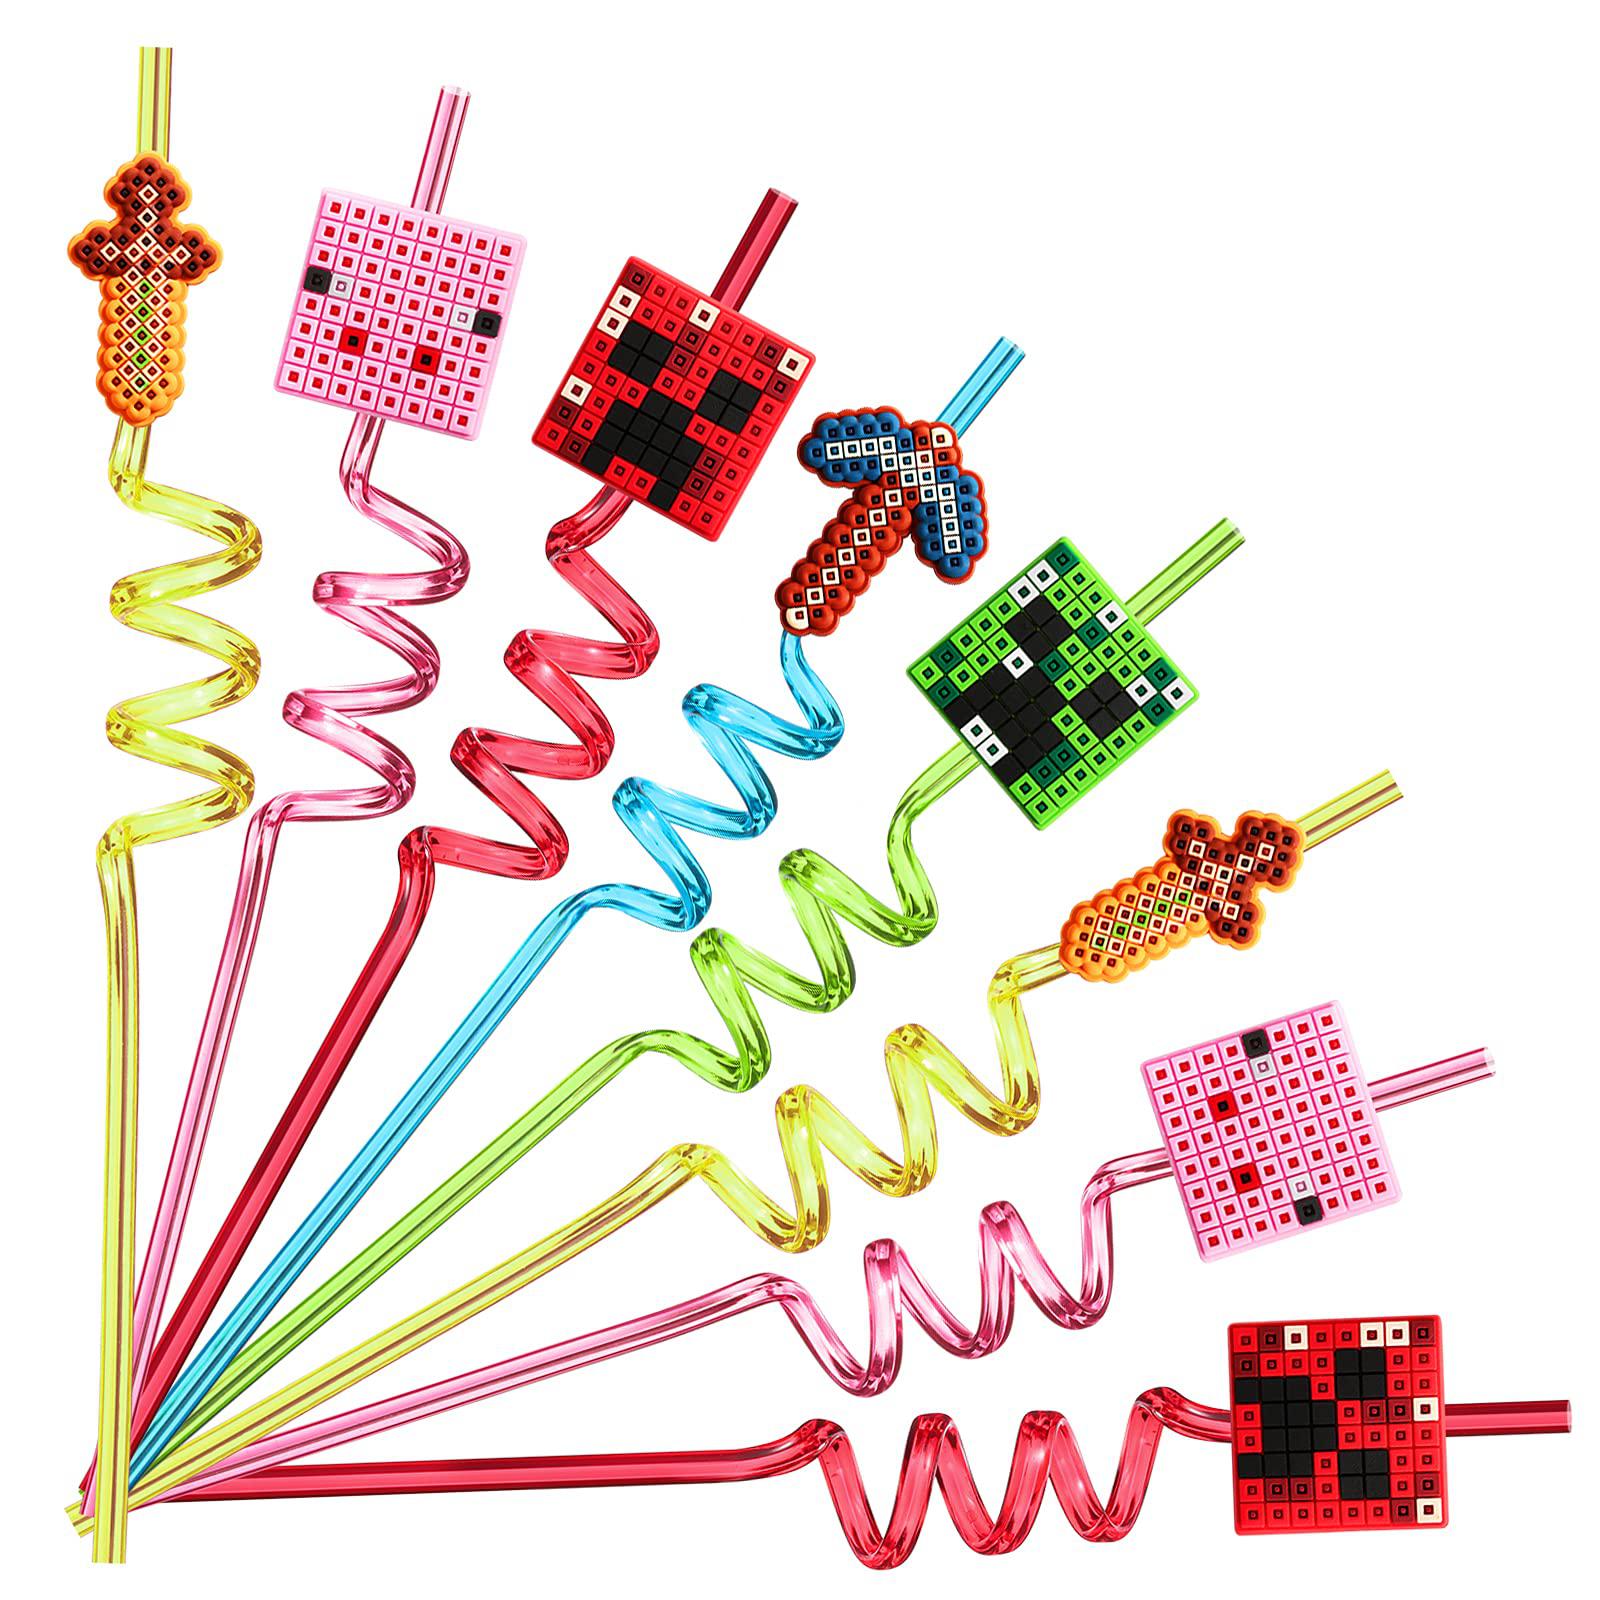 Lidmada 25 Reusable Pixel Straws for Miner Craft Party Supplies Favors, Pixel Spider Creepah Party Supplies Gift with 2 Cleaning Brushes